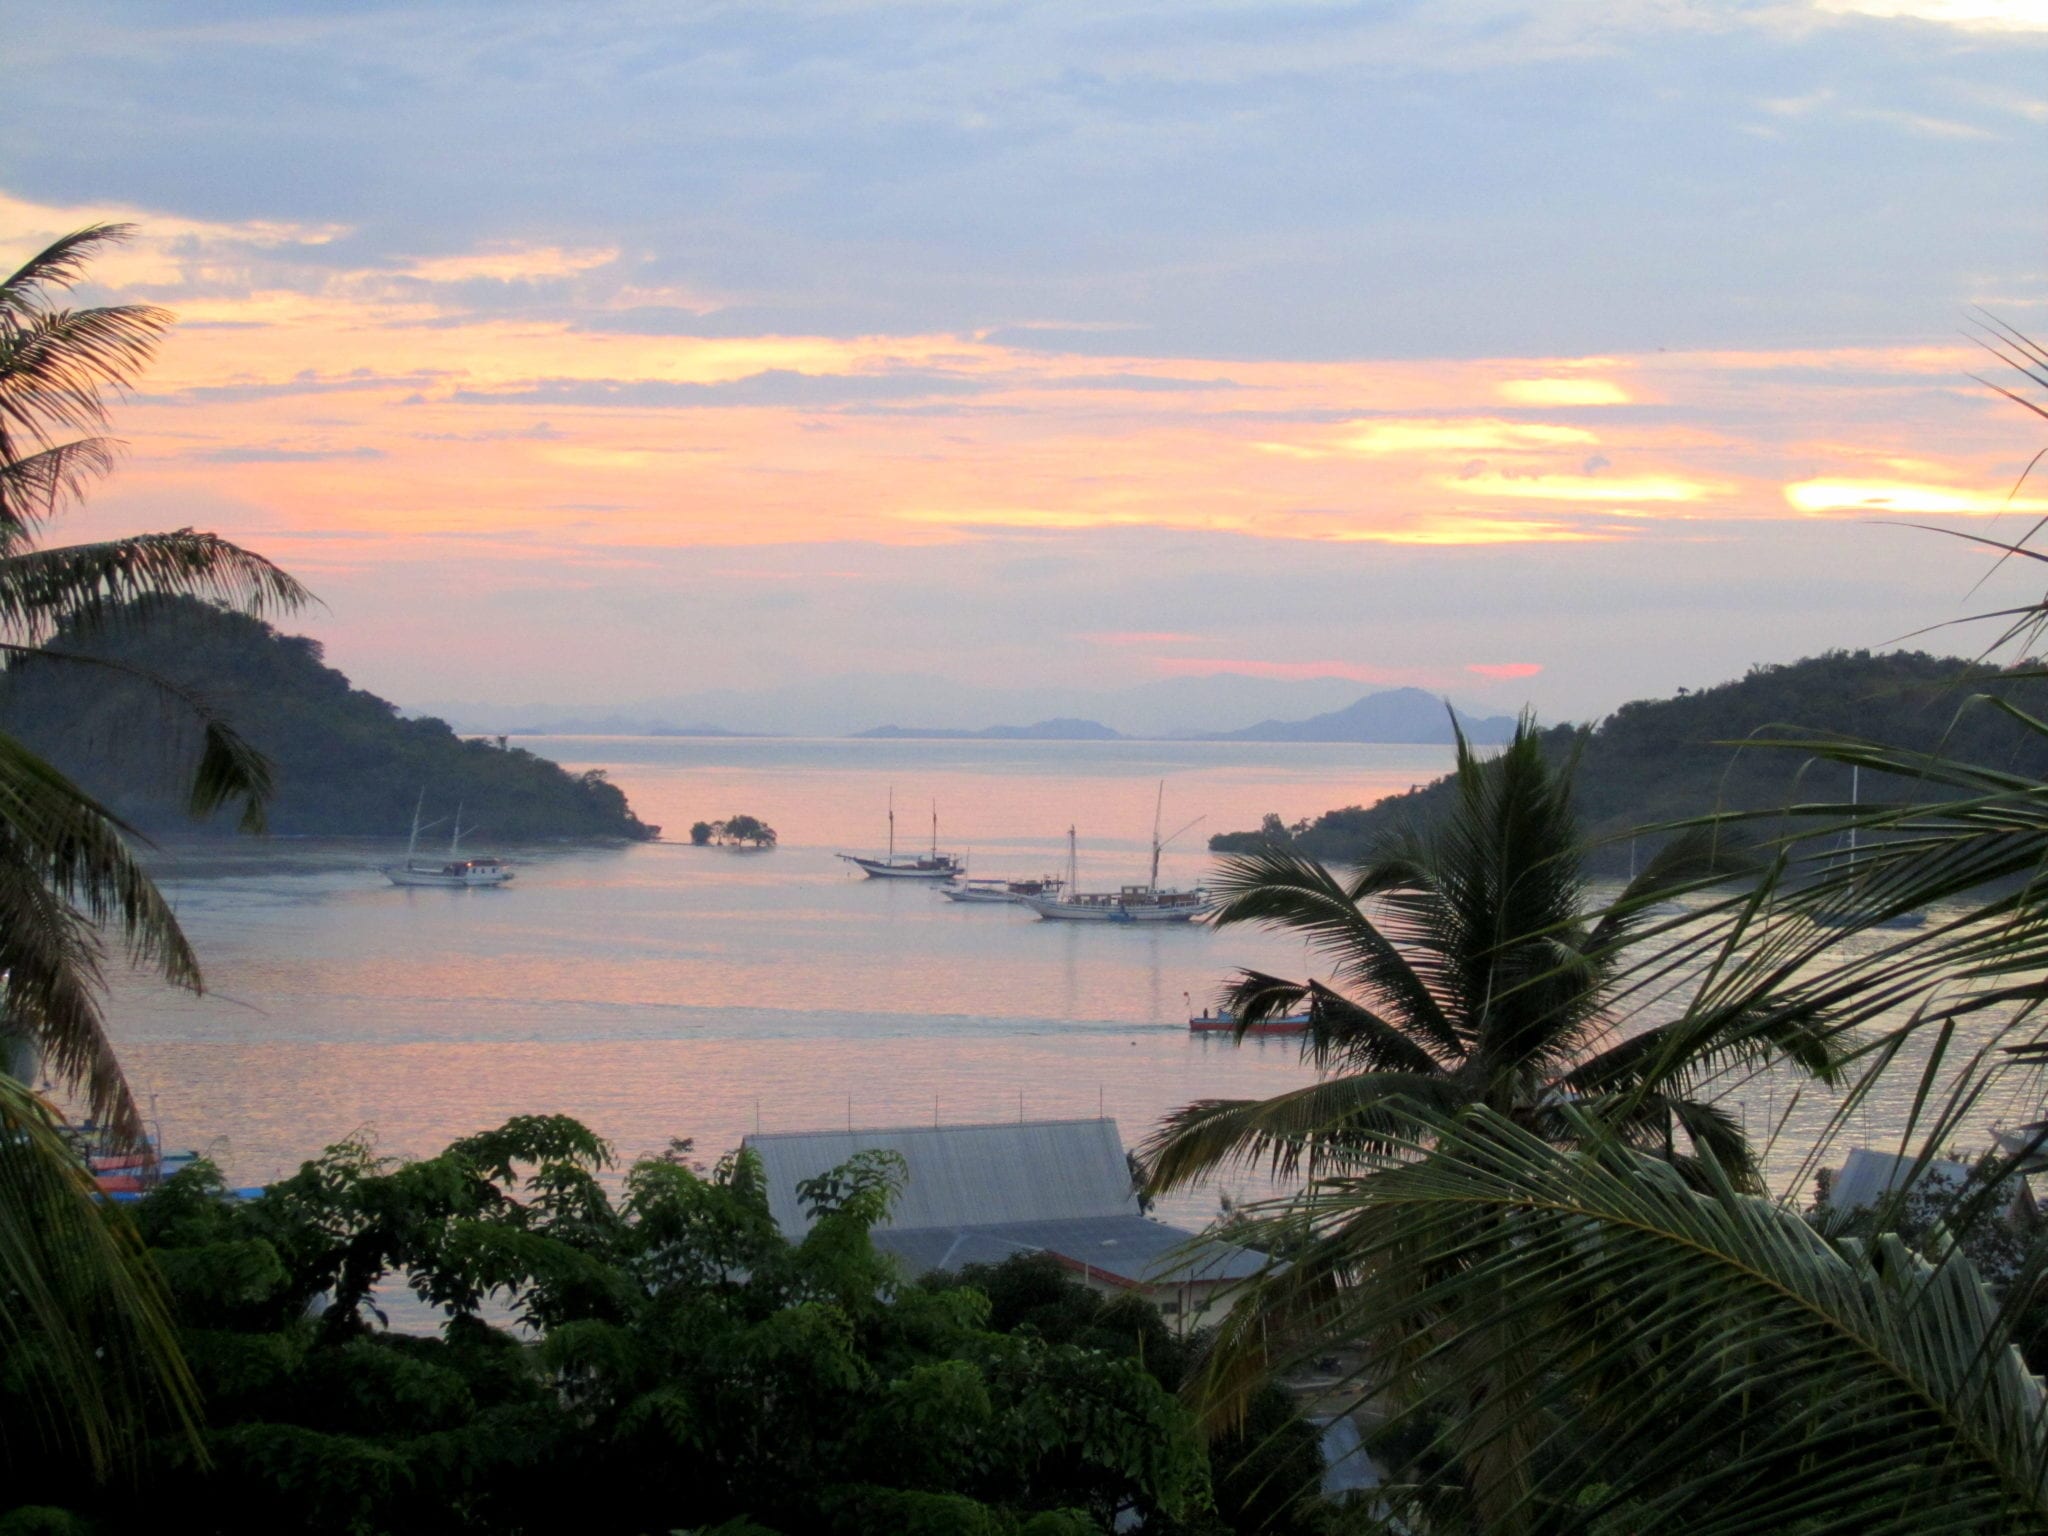 Stranded in Indonesia? There are Worse Places than Labuan Bajo